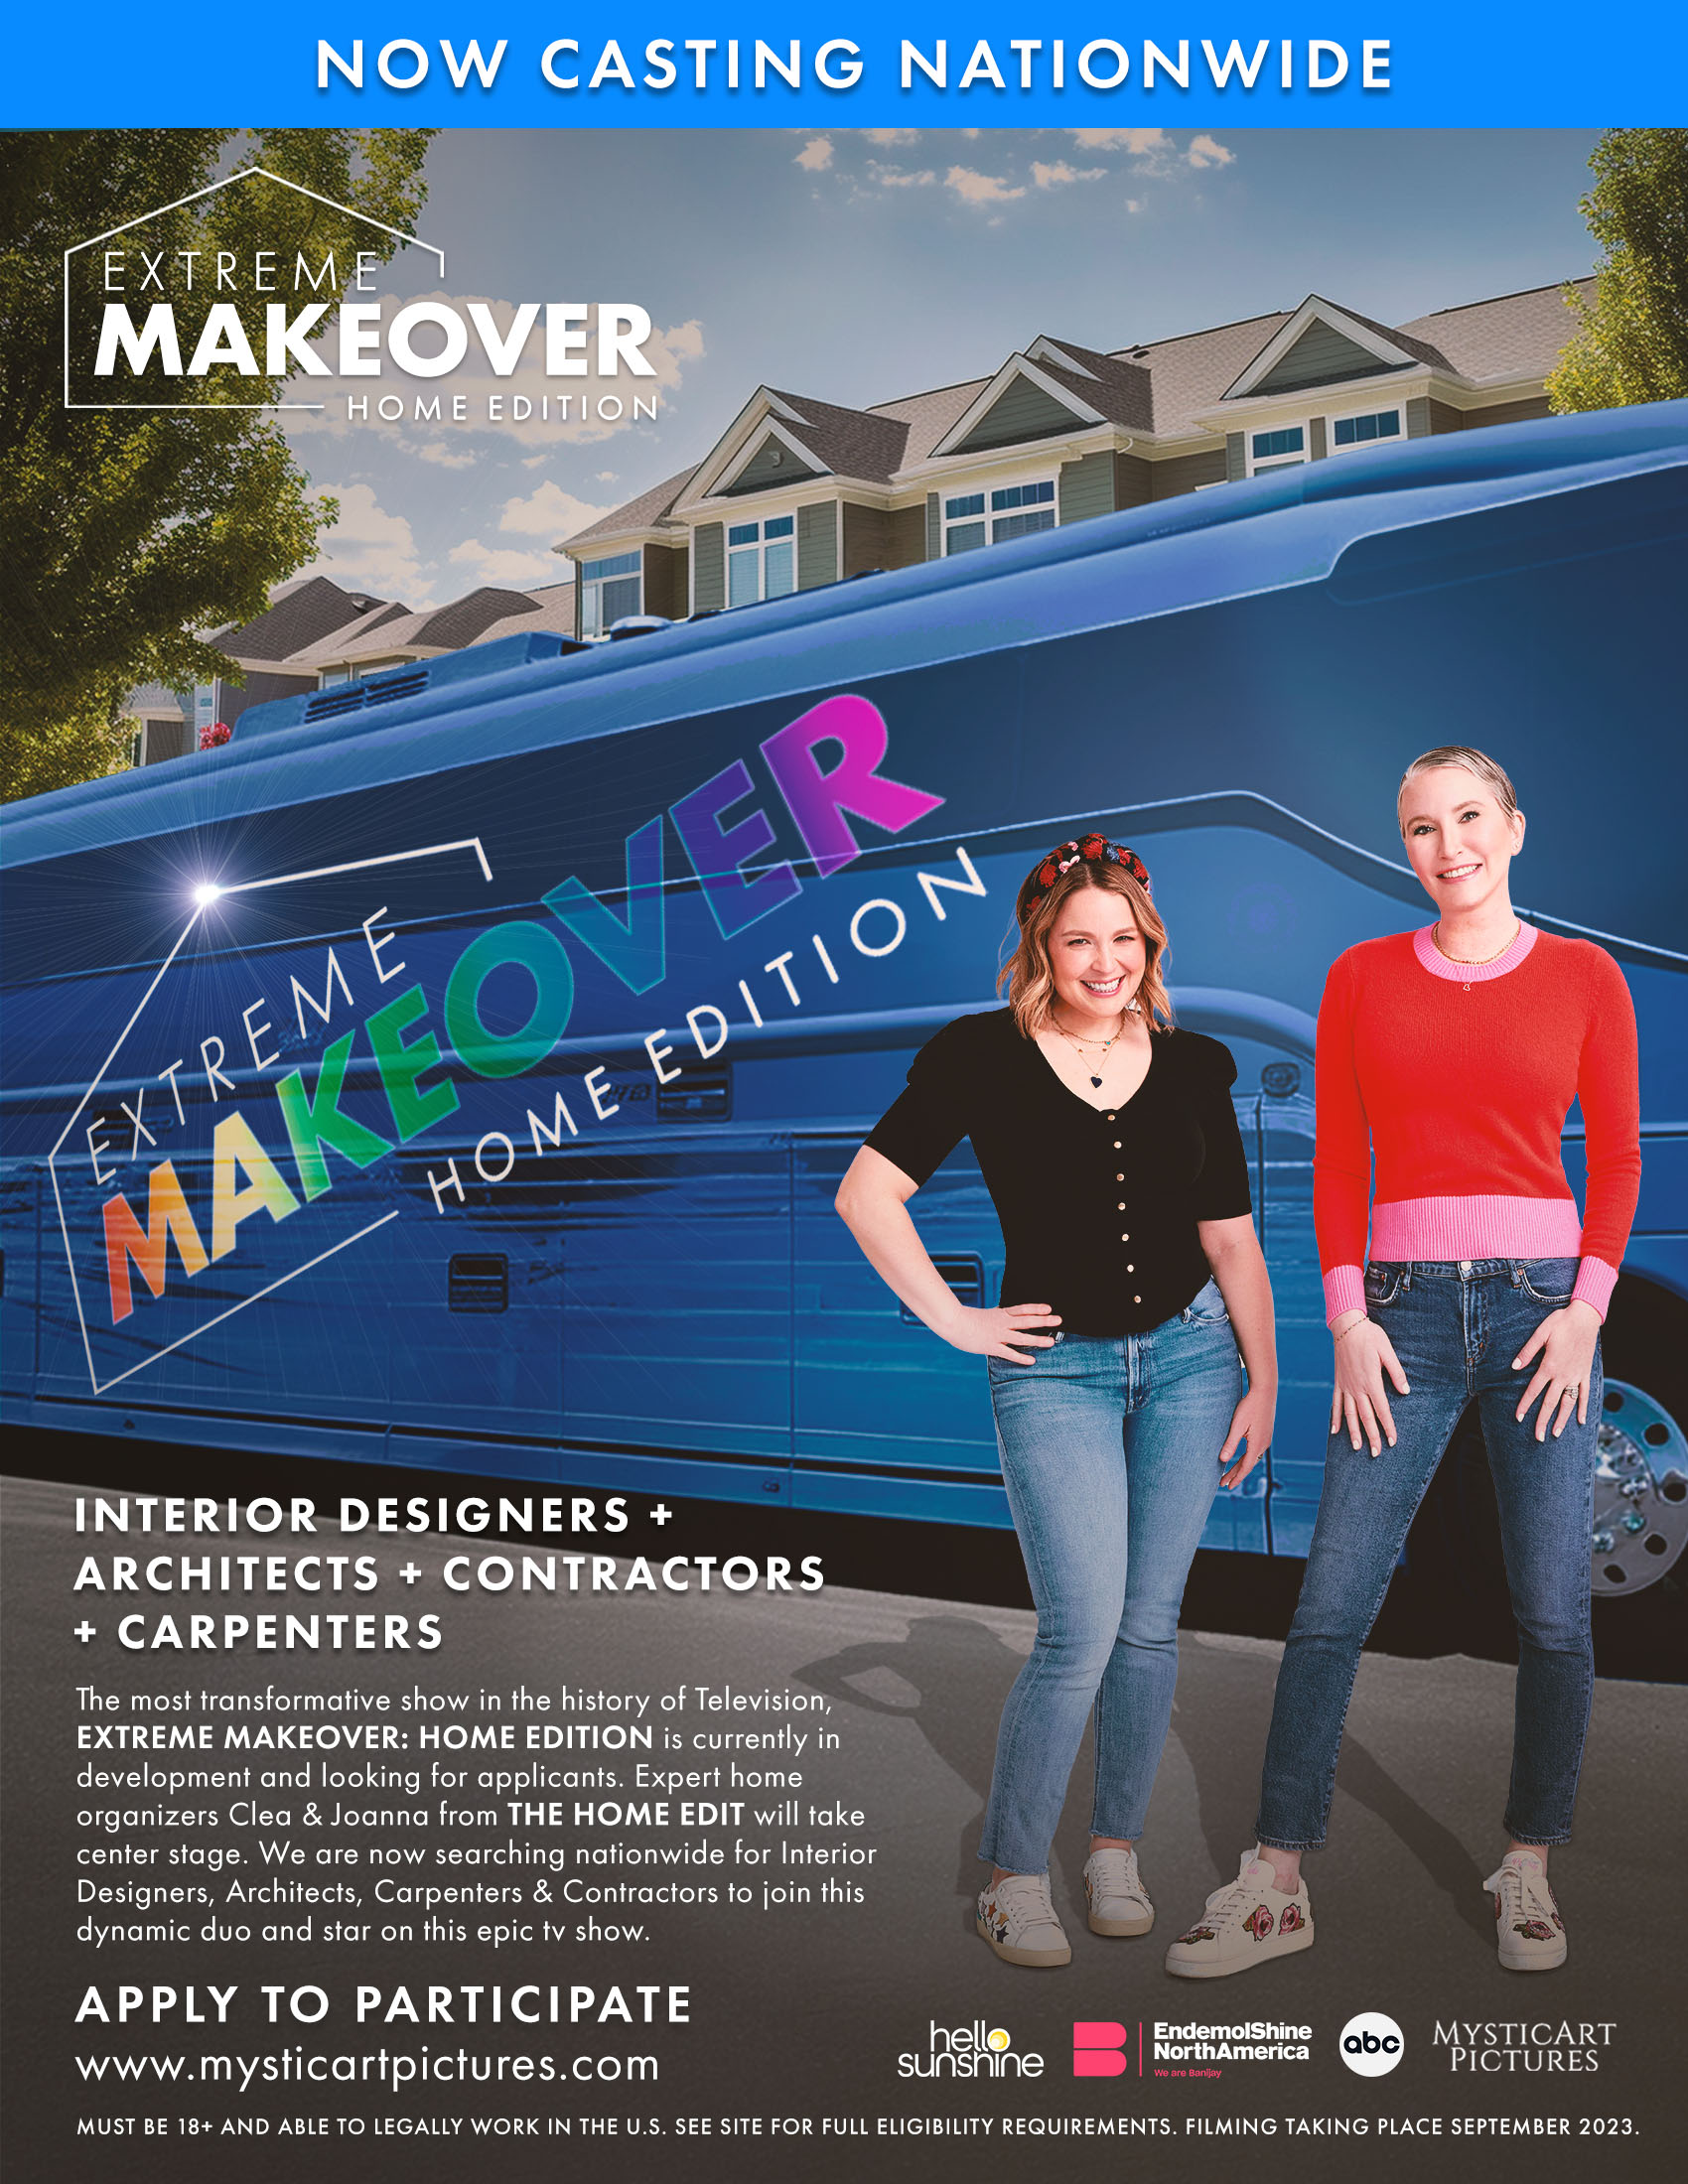 Mysticart Pictures Casting Extreme Makeover Home Edition Designers